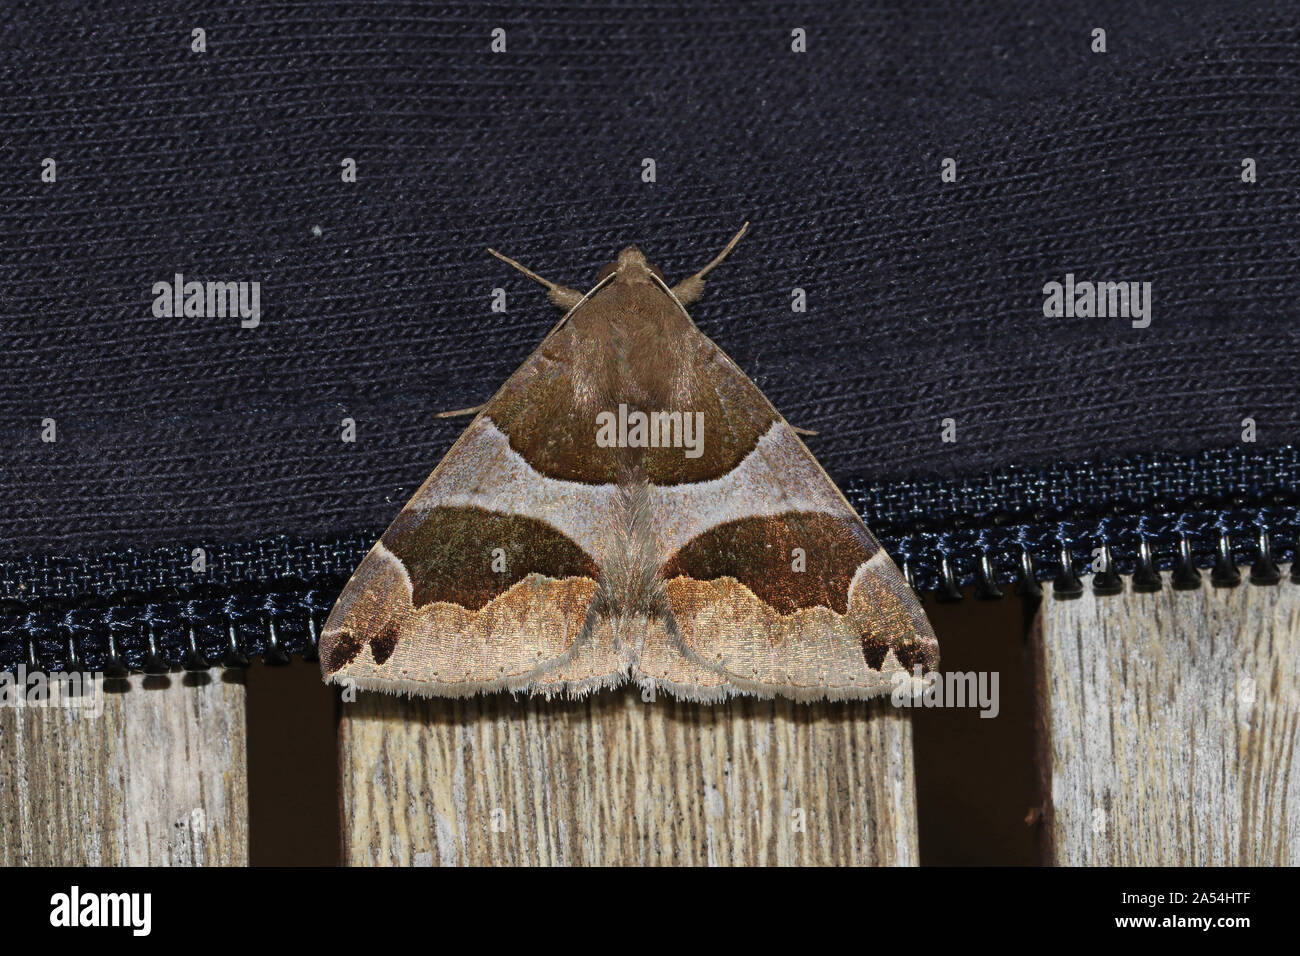 Passenger moth dysgonia algira family noctuidae with a very geometric pattern on a wooden and cloth surface in Italy native to Africa and S Europe Stock Photo